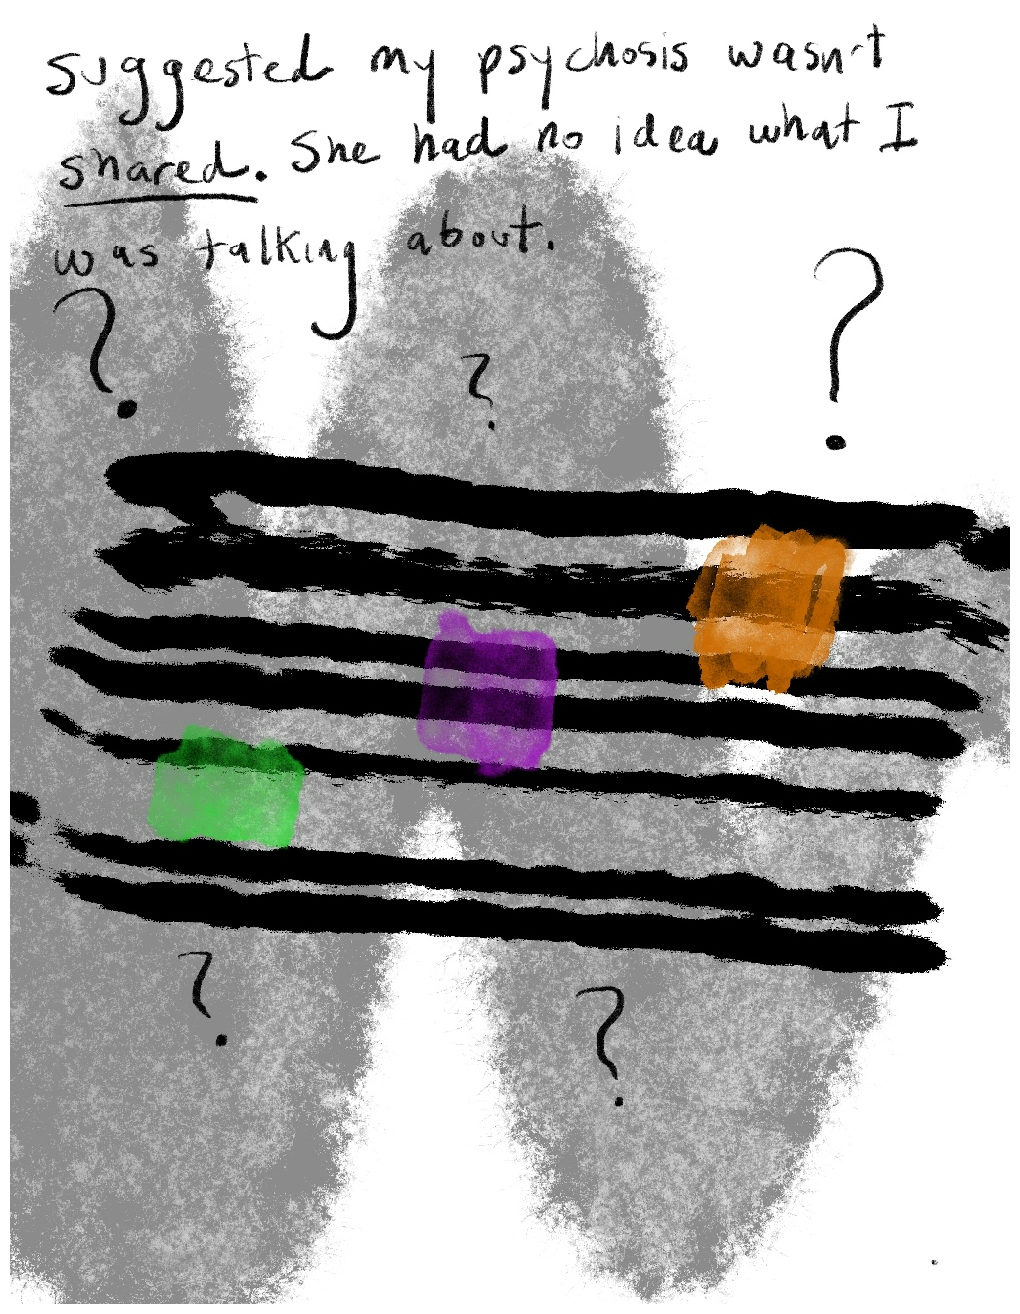 Panel 4 of a four-panel comic called My delusion wasn't shared'', consisting of thick black line drawing on a white background. A zig-zag of mottled grey is spread across the panel like a random paint brush stroke. On top of this are seven narrow horizontal black lines like a musical stave. Three daubs of colour (green, purple and orange) ascend across the 'stave' like musical notes. Randomly spread above and below the 'stave' are written question marks. The text at the top of the panel reads "Suggested my psychosis wasn't shared [word underlined]. She had no idea what I was talking about.